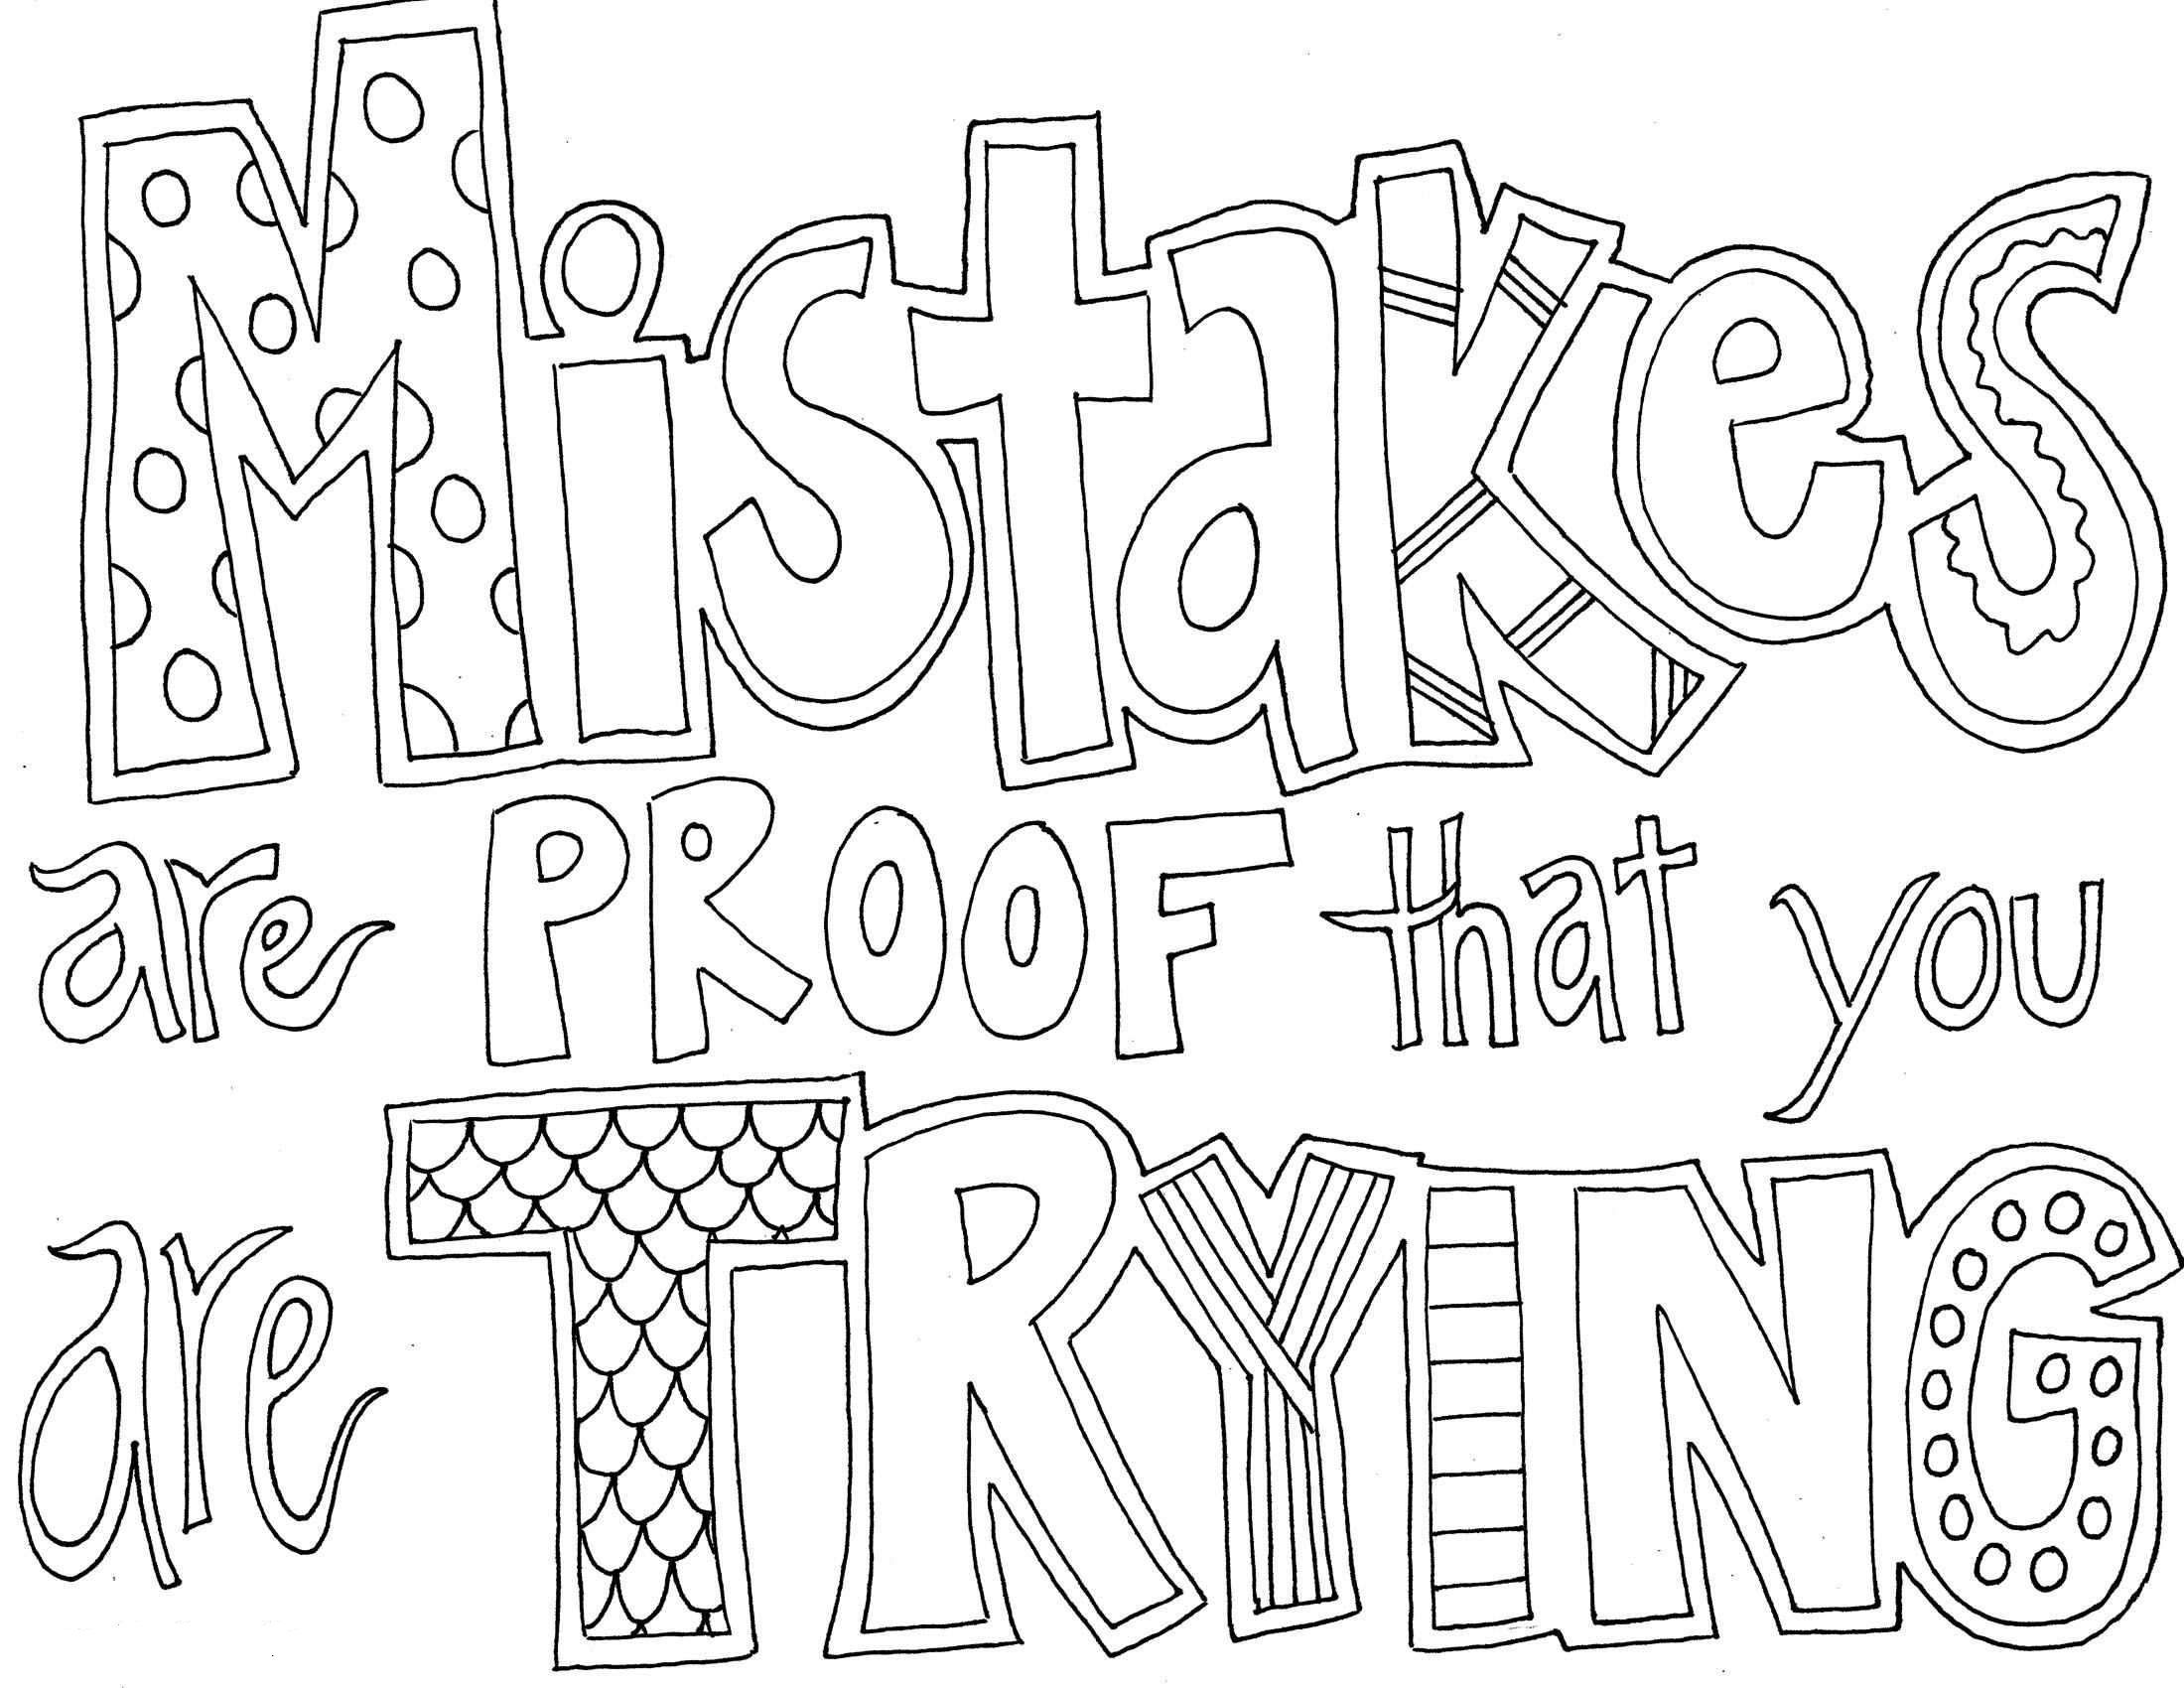 Quote and Sayings Coloring Pages ...pinterest.com